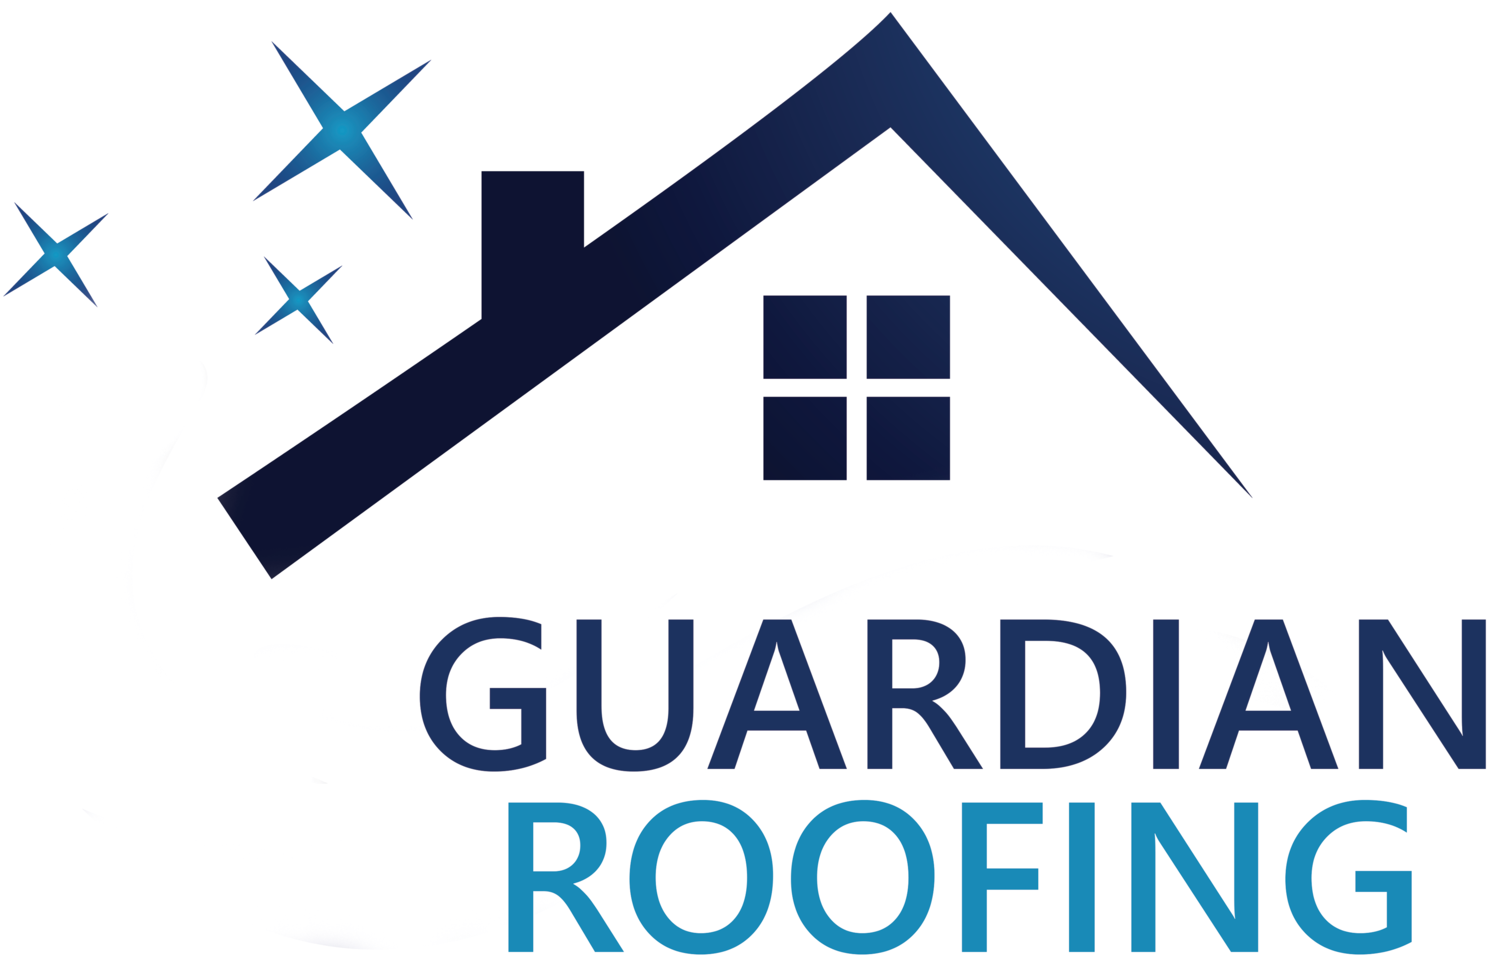 Guardian Roofing: Roof repair &amp; replacement in Little Rock Arkansas. Skylights, gutters, tile, siding &amp; more!